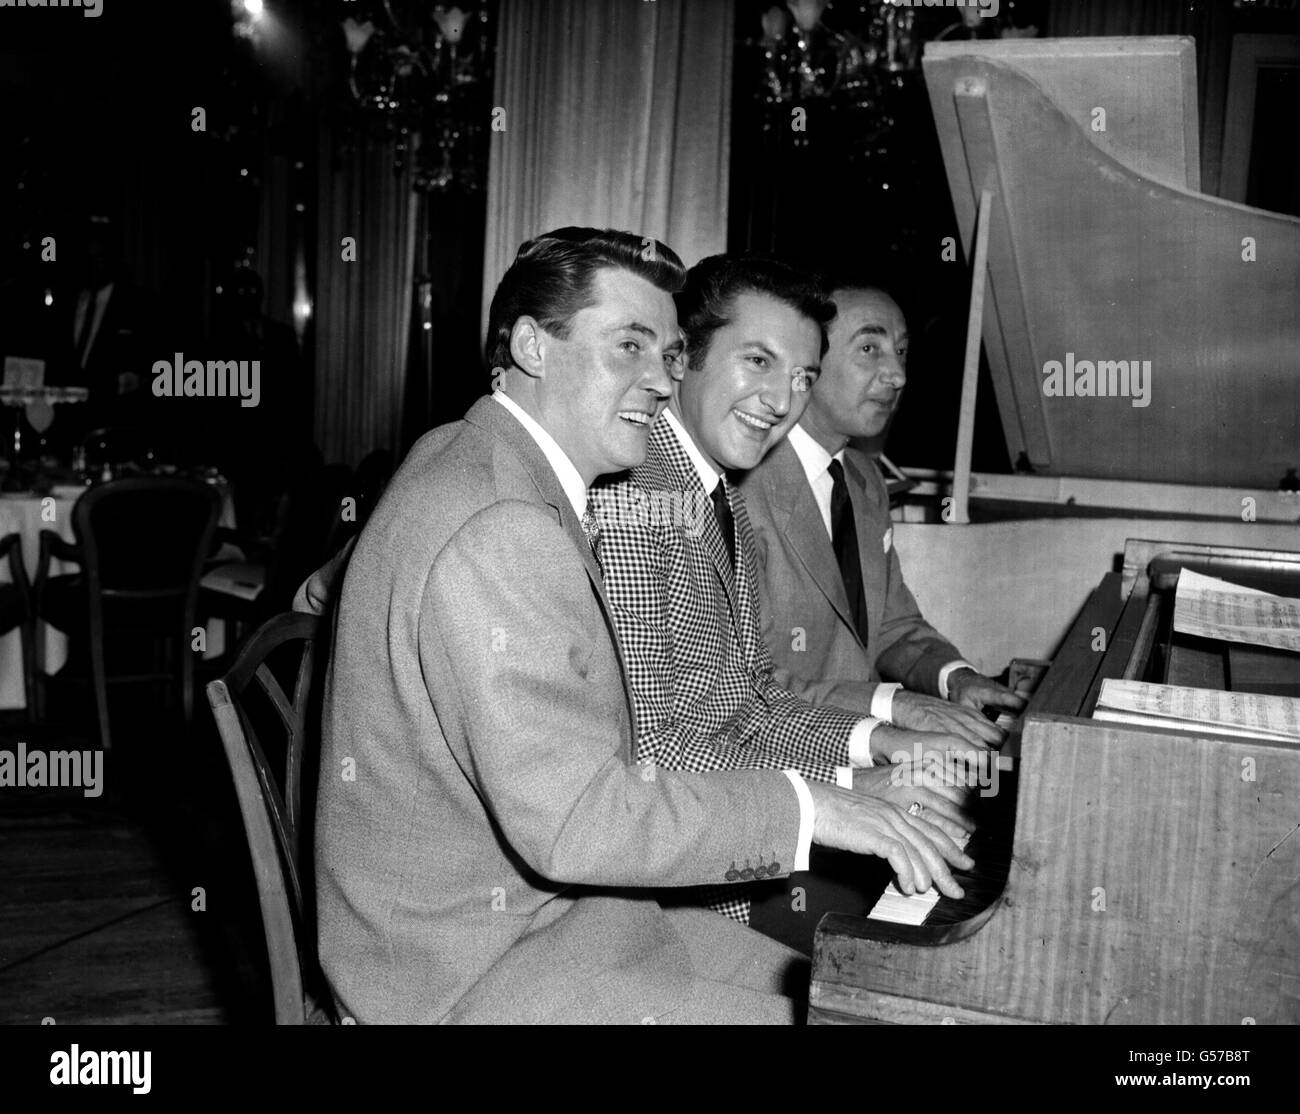 RUSS CONWAY 1960: Pictured at the keys in London's Dorchester Hotel are (l-r) British pianist Russ Conway, American pianist Liberace and British bandleader Stanley Black. They were all attending the Variety Club's 'Golden Disc' Luncheon. (Conway d.16/11/2000 in Eastbourne). Stock Photo